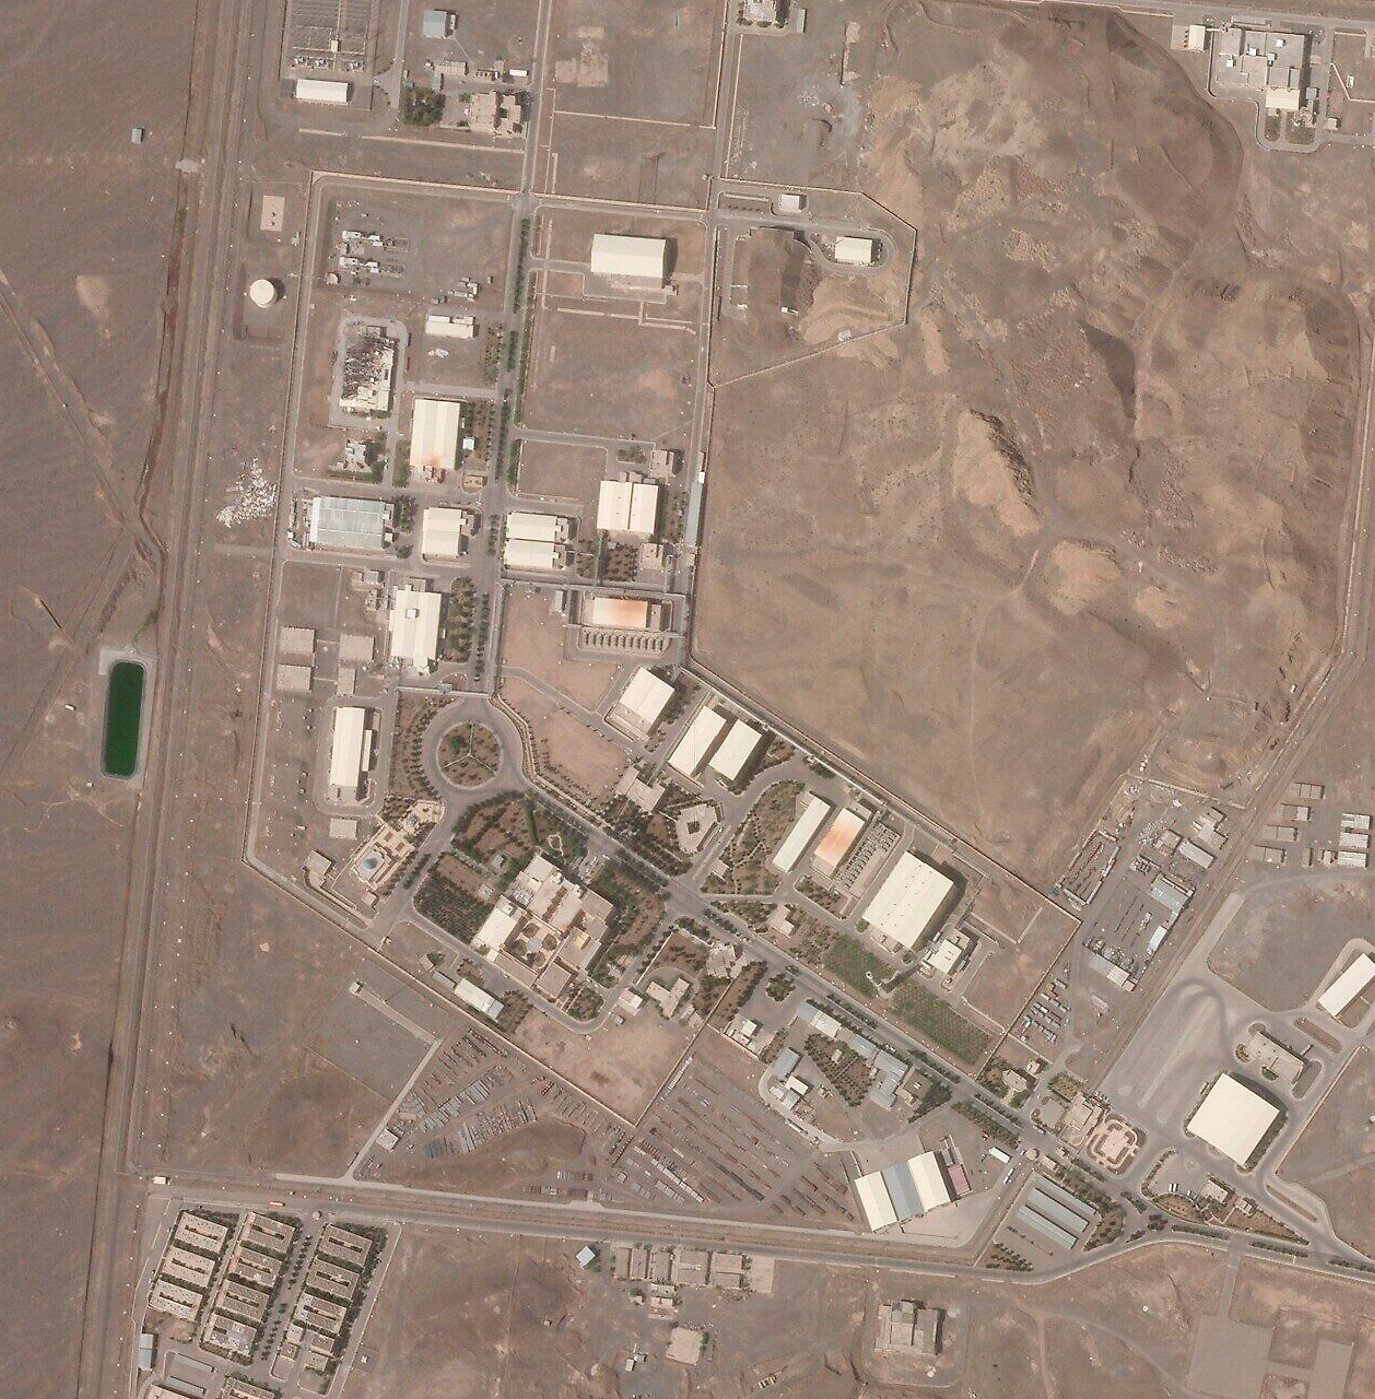 A birds-eye view of the Natanz Nuclear Facility